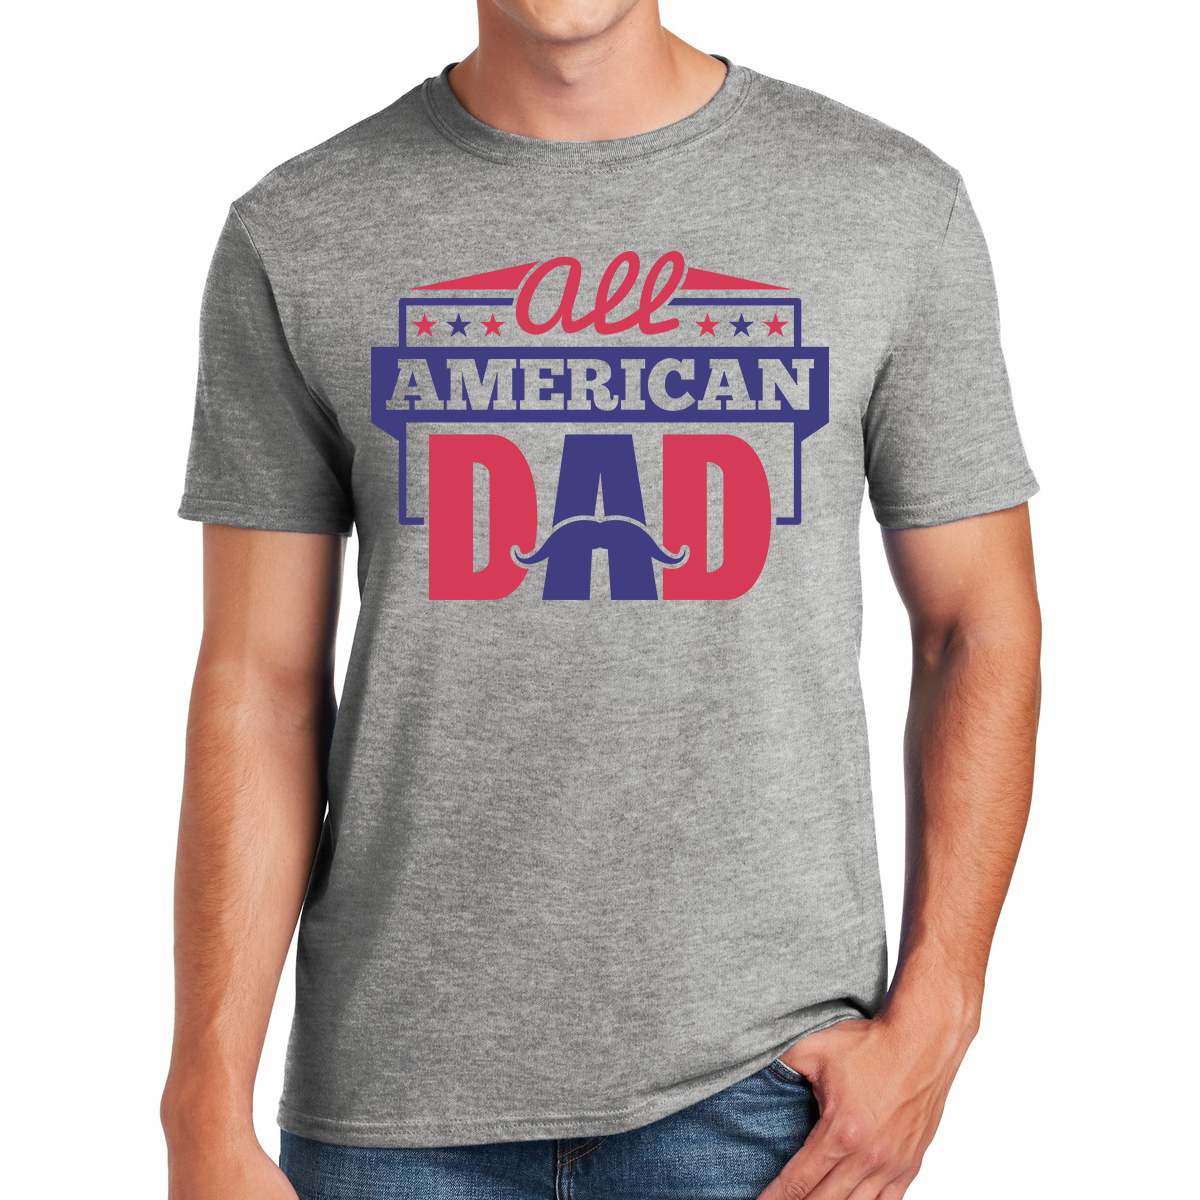 All American Dad Proud Patriotic And Awesome Gift For Dads T-shirt